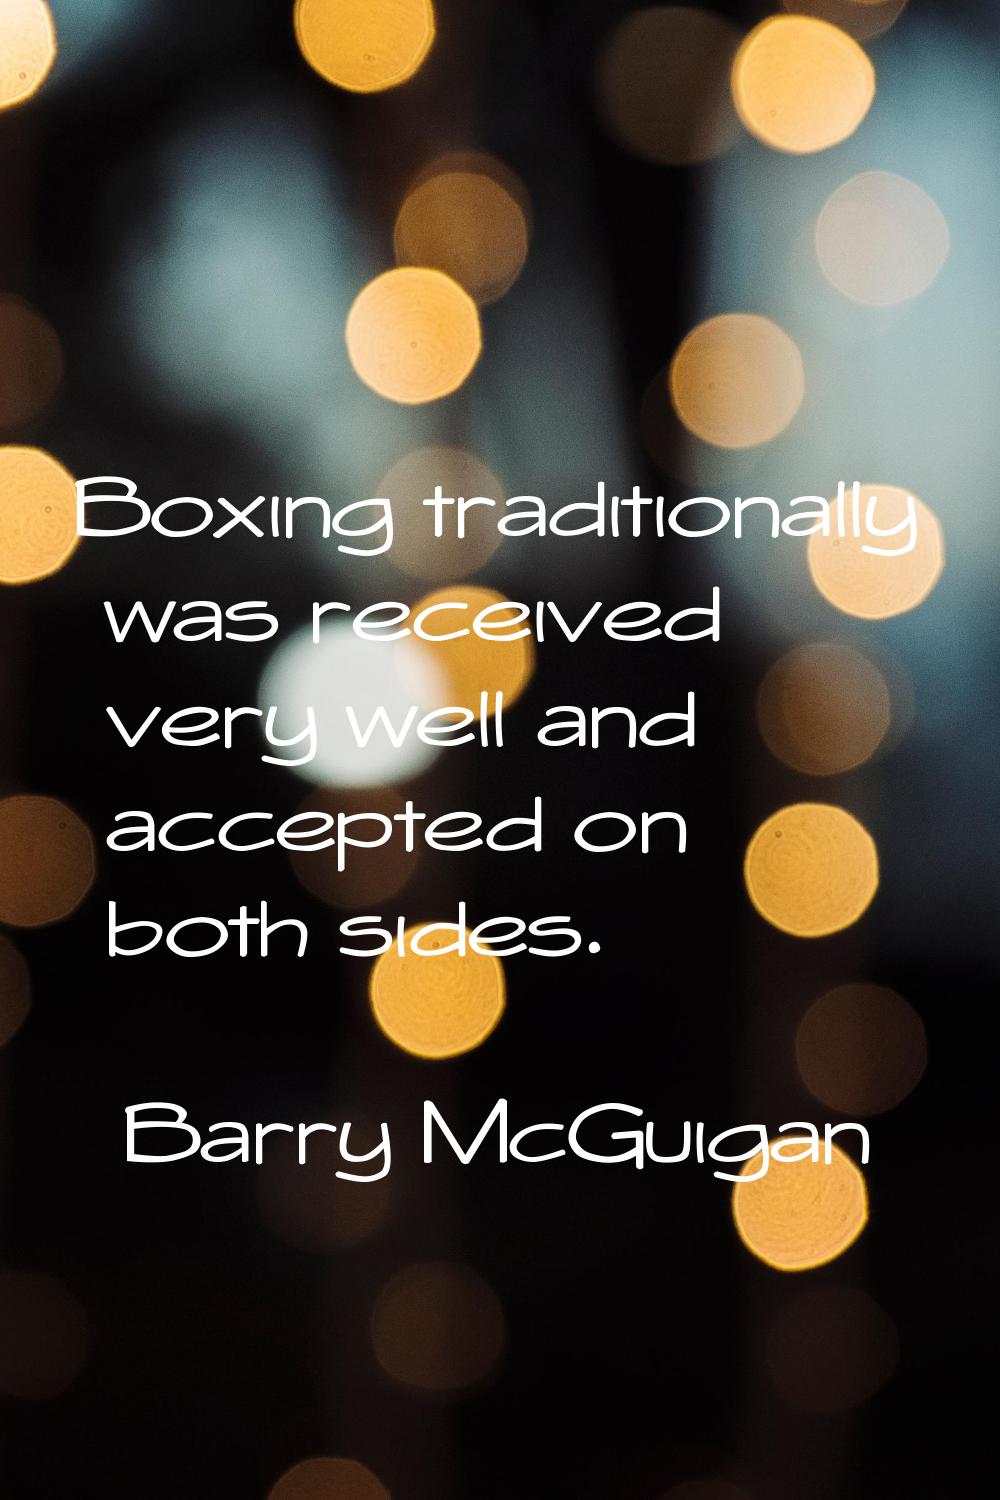 Boxing traditionally was received very well and accepted on both sides.